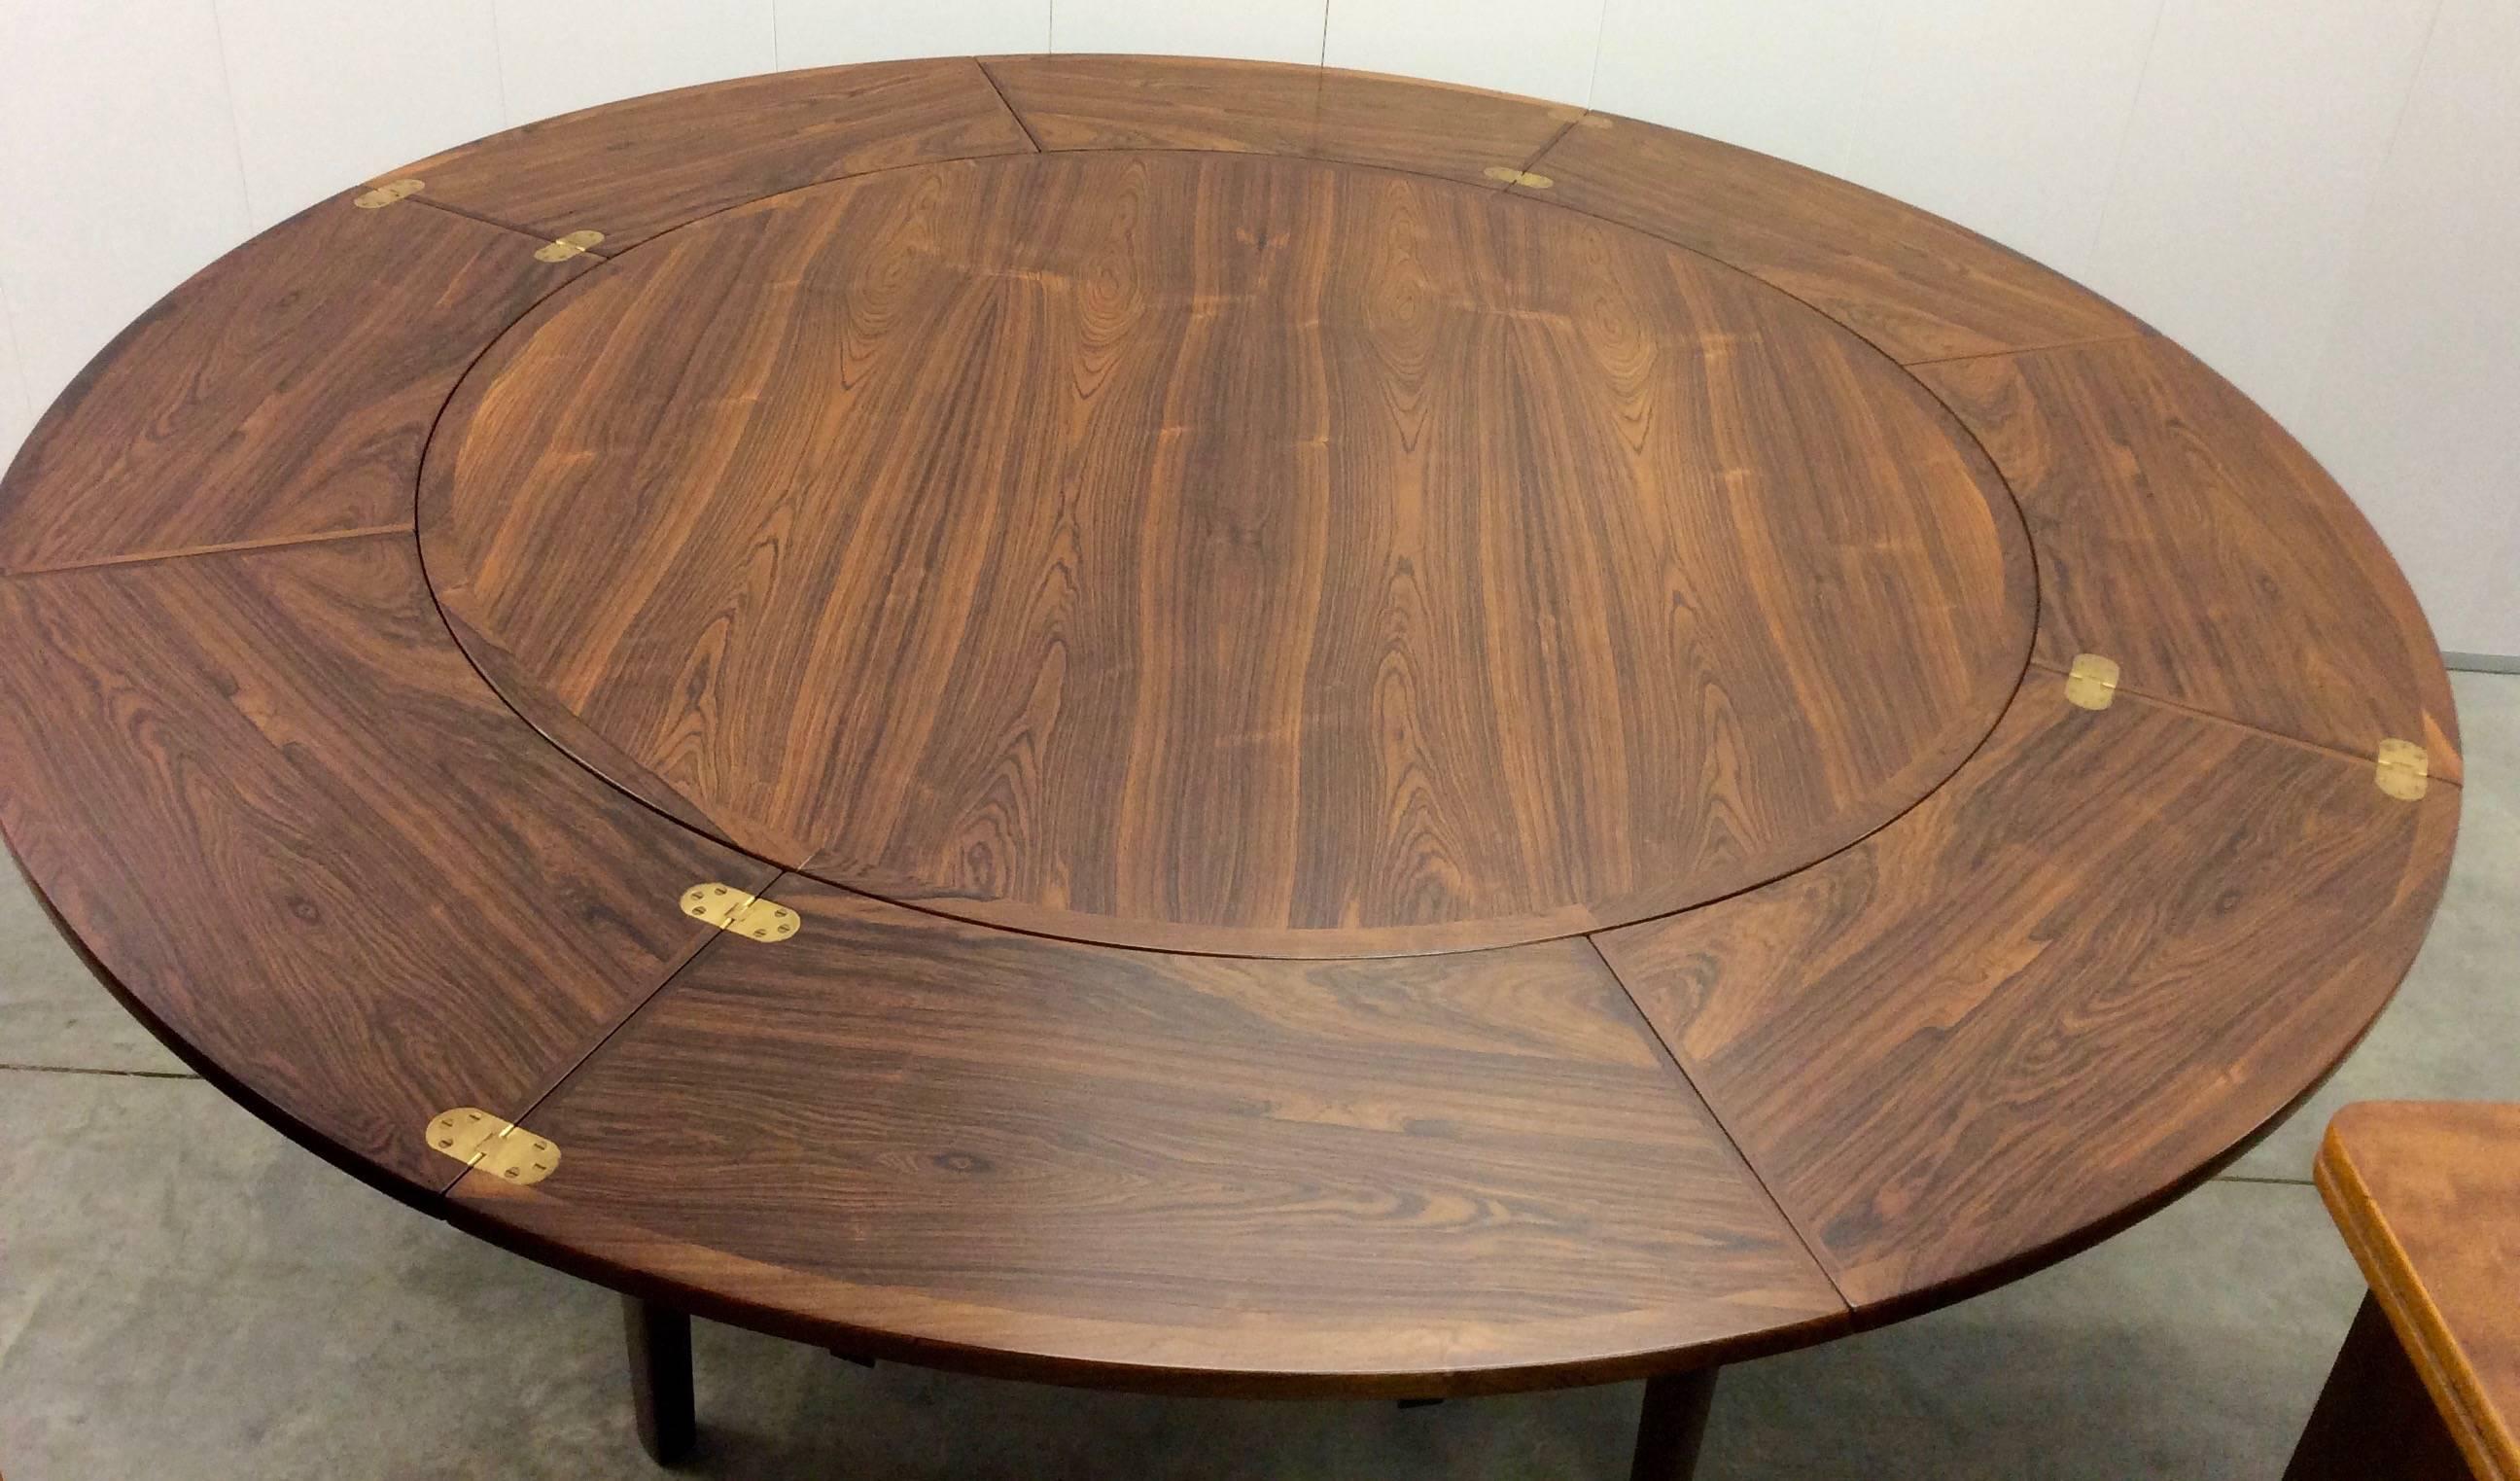 Mid-Century design at its best designed and produced by Svend Dyrlund.
Stunning rosewood flip flap dining table.
This extendable dining table has four leaves which pull out and flip over to rest on each other to form an outer ring around the main